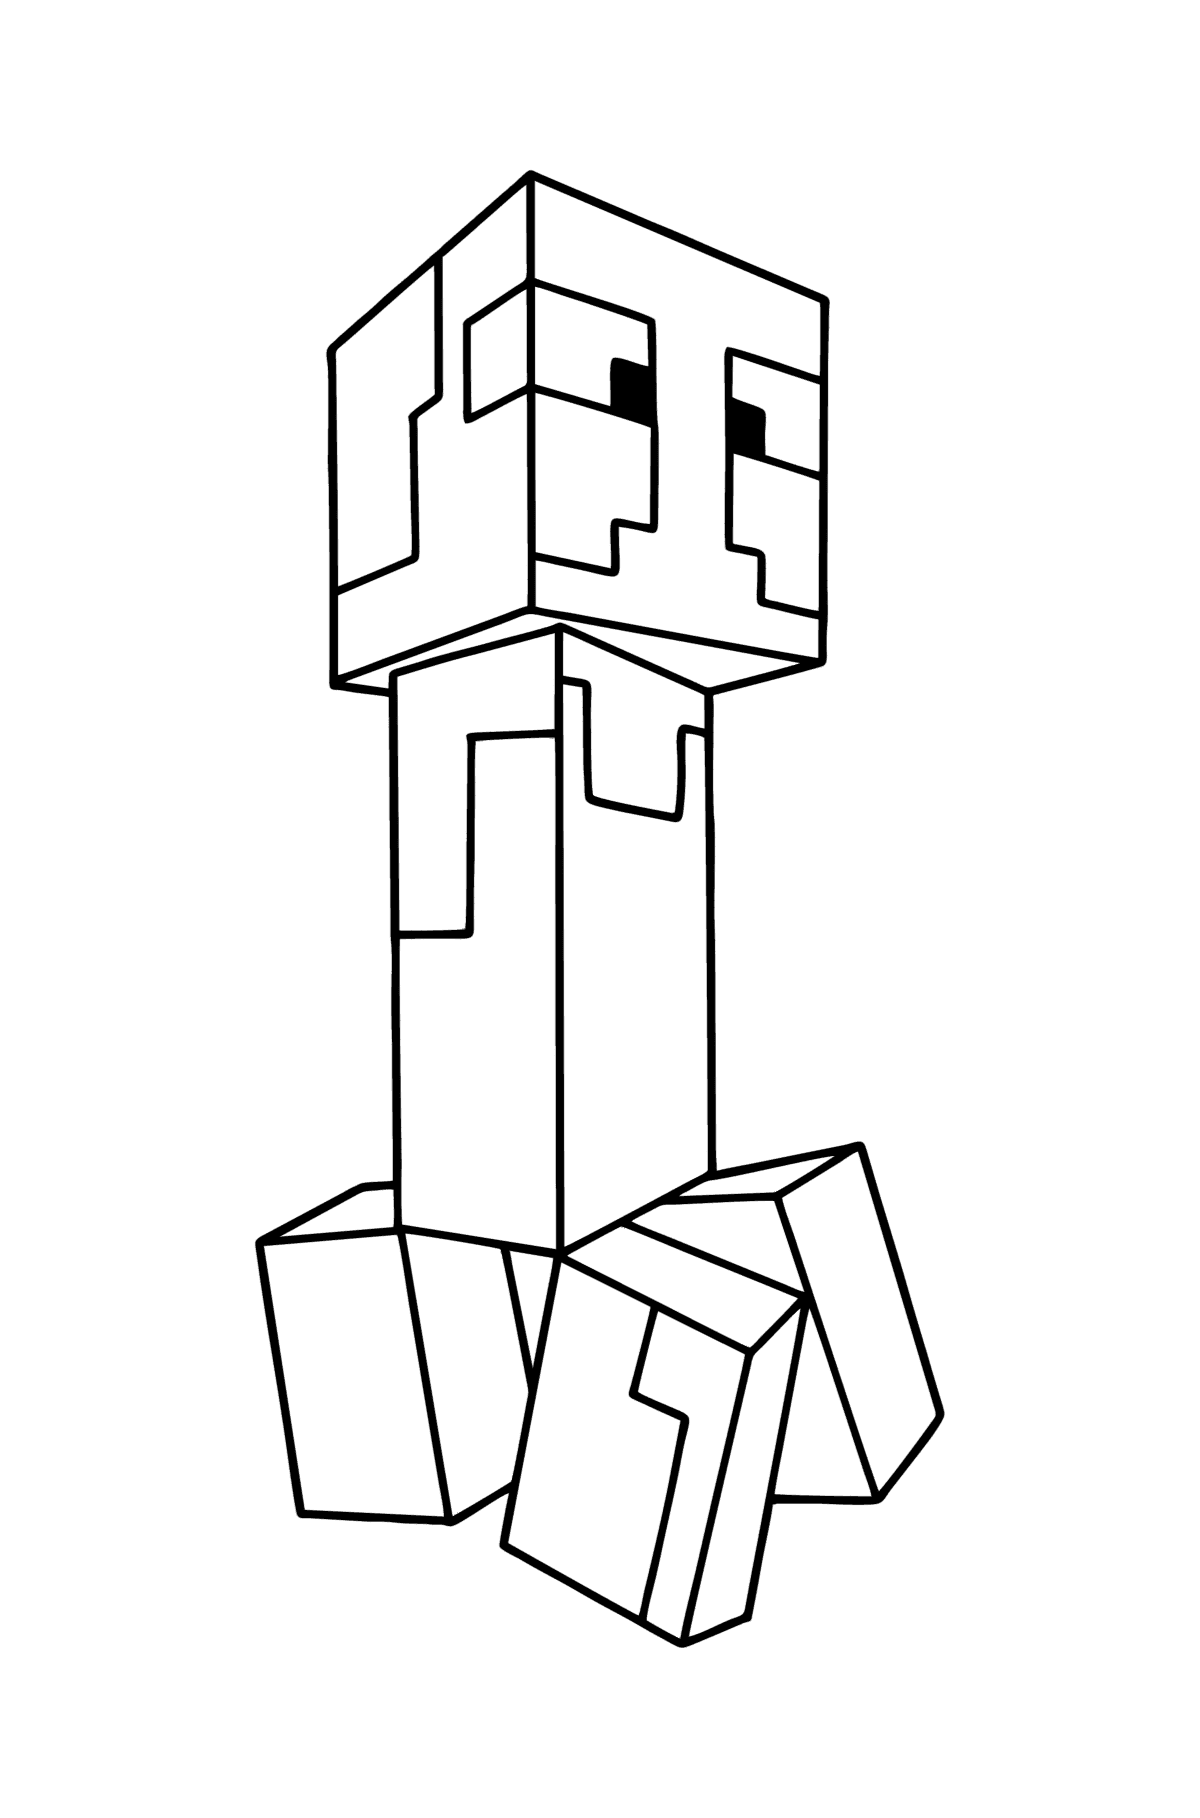 Minecraft Creeper coloring page - Coloring Pages for Kids